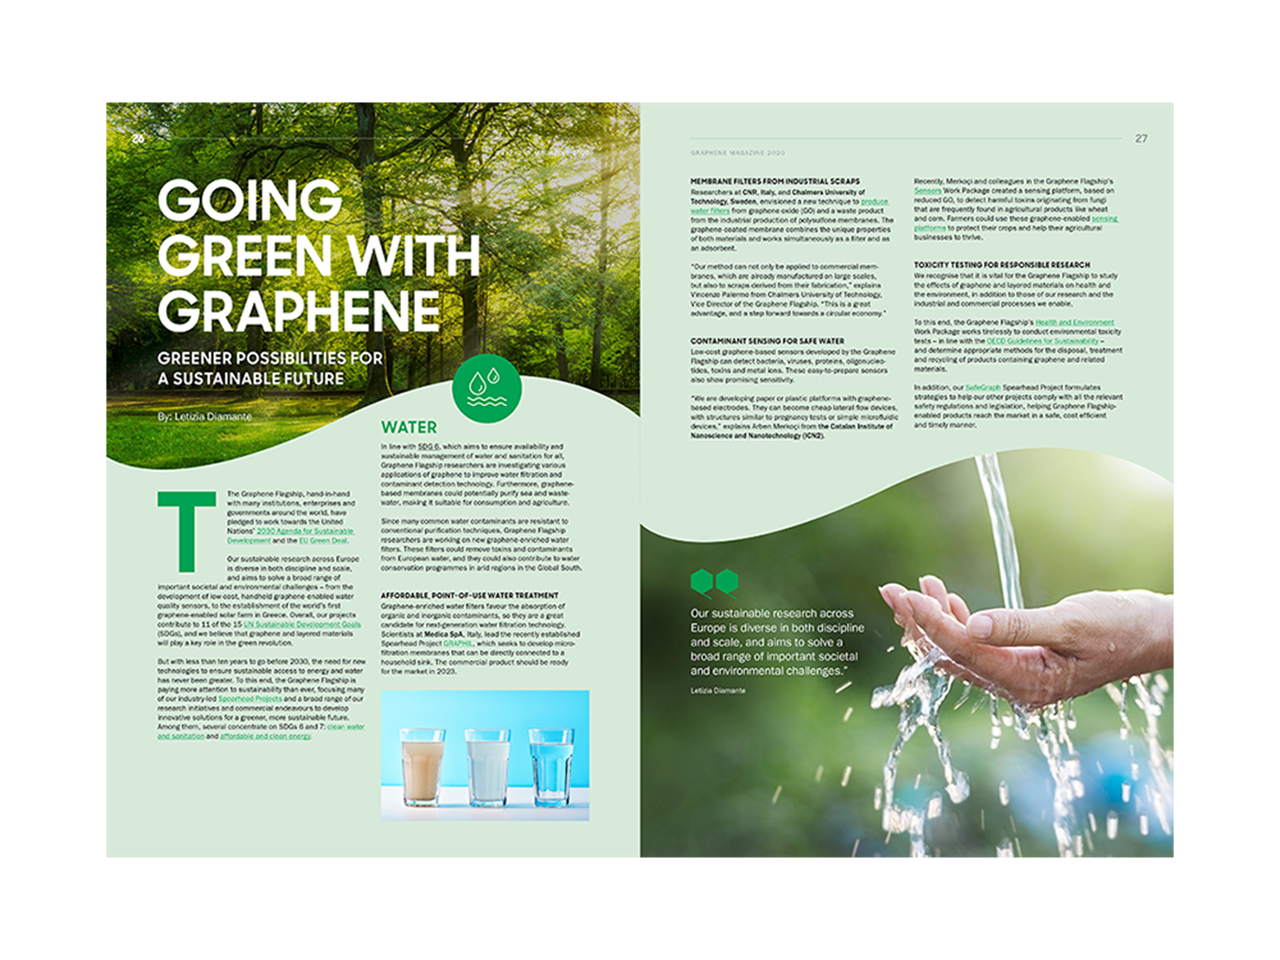 Magazine article image: Going green with graphene